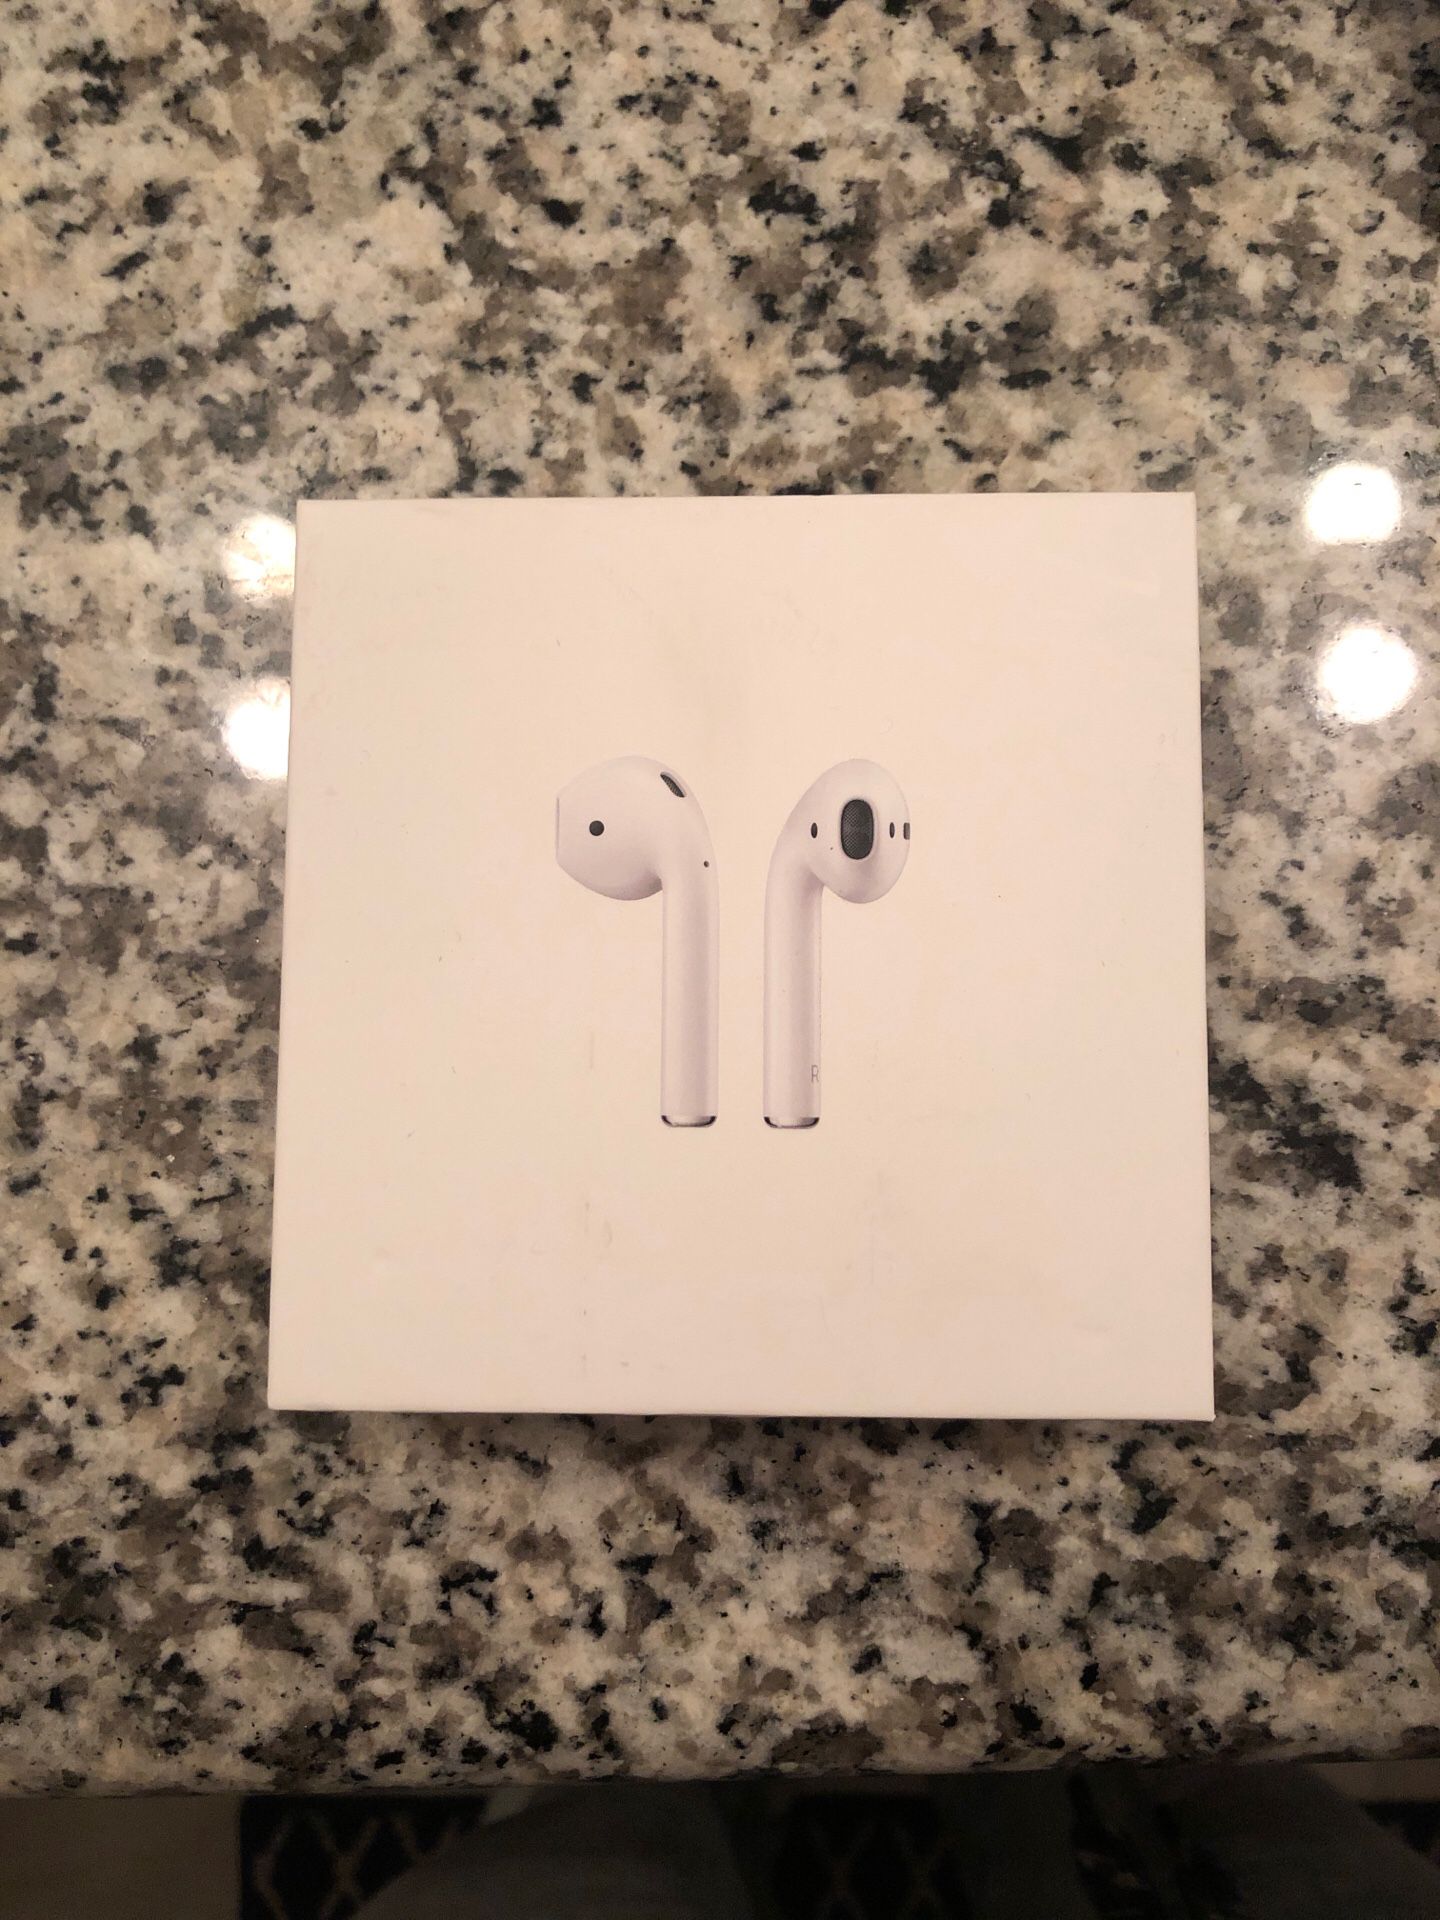 Airpods in case with charger! (Not clones) (Apple product)